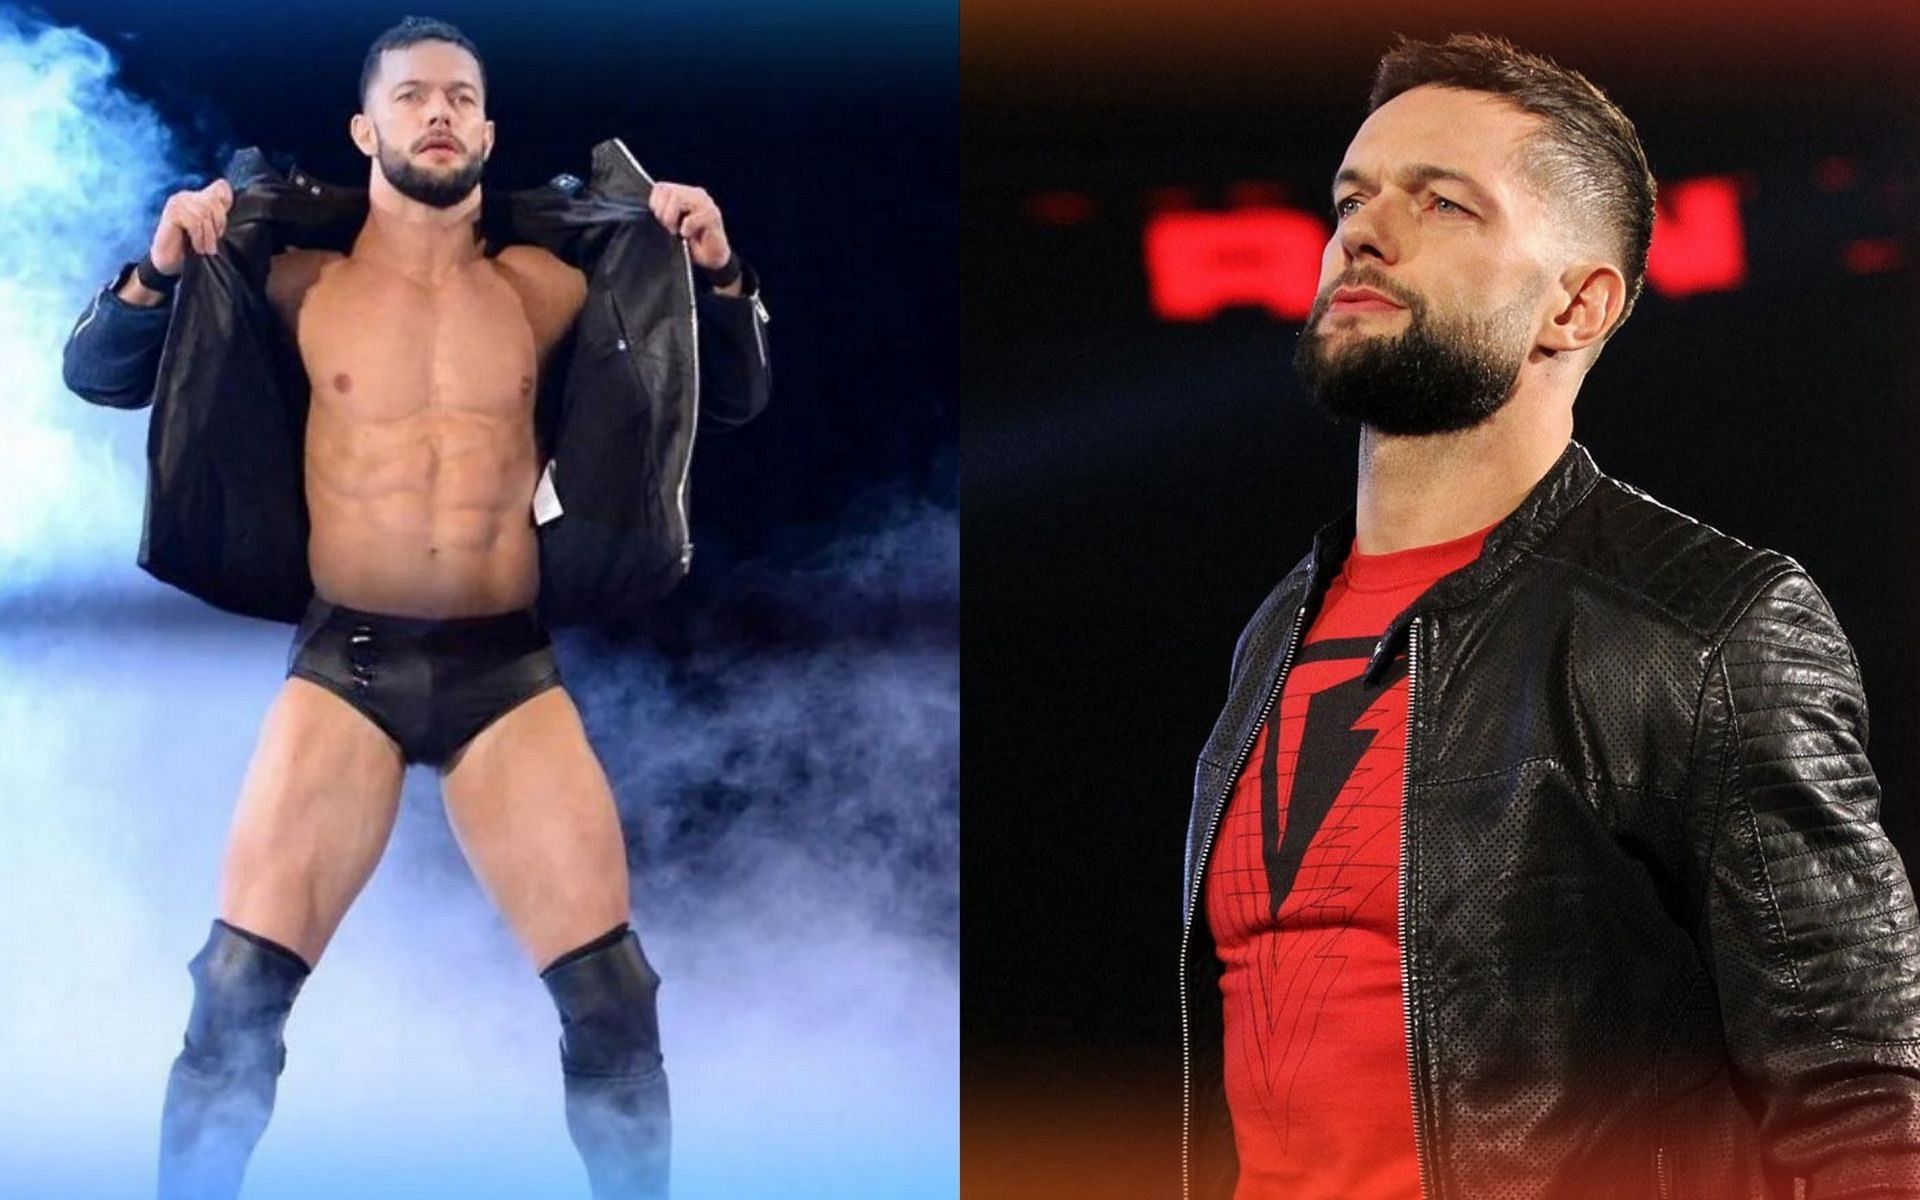 Finn Balor has always cited a black leather jacket and shorts during his WWE career